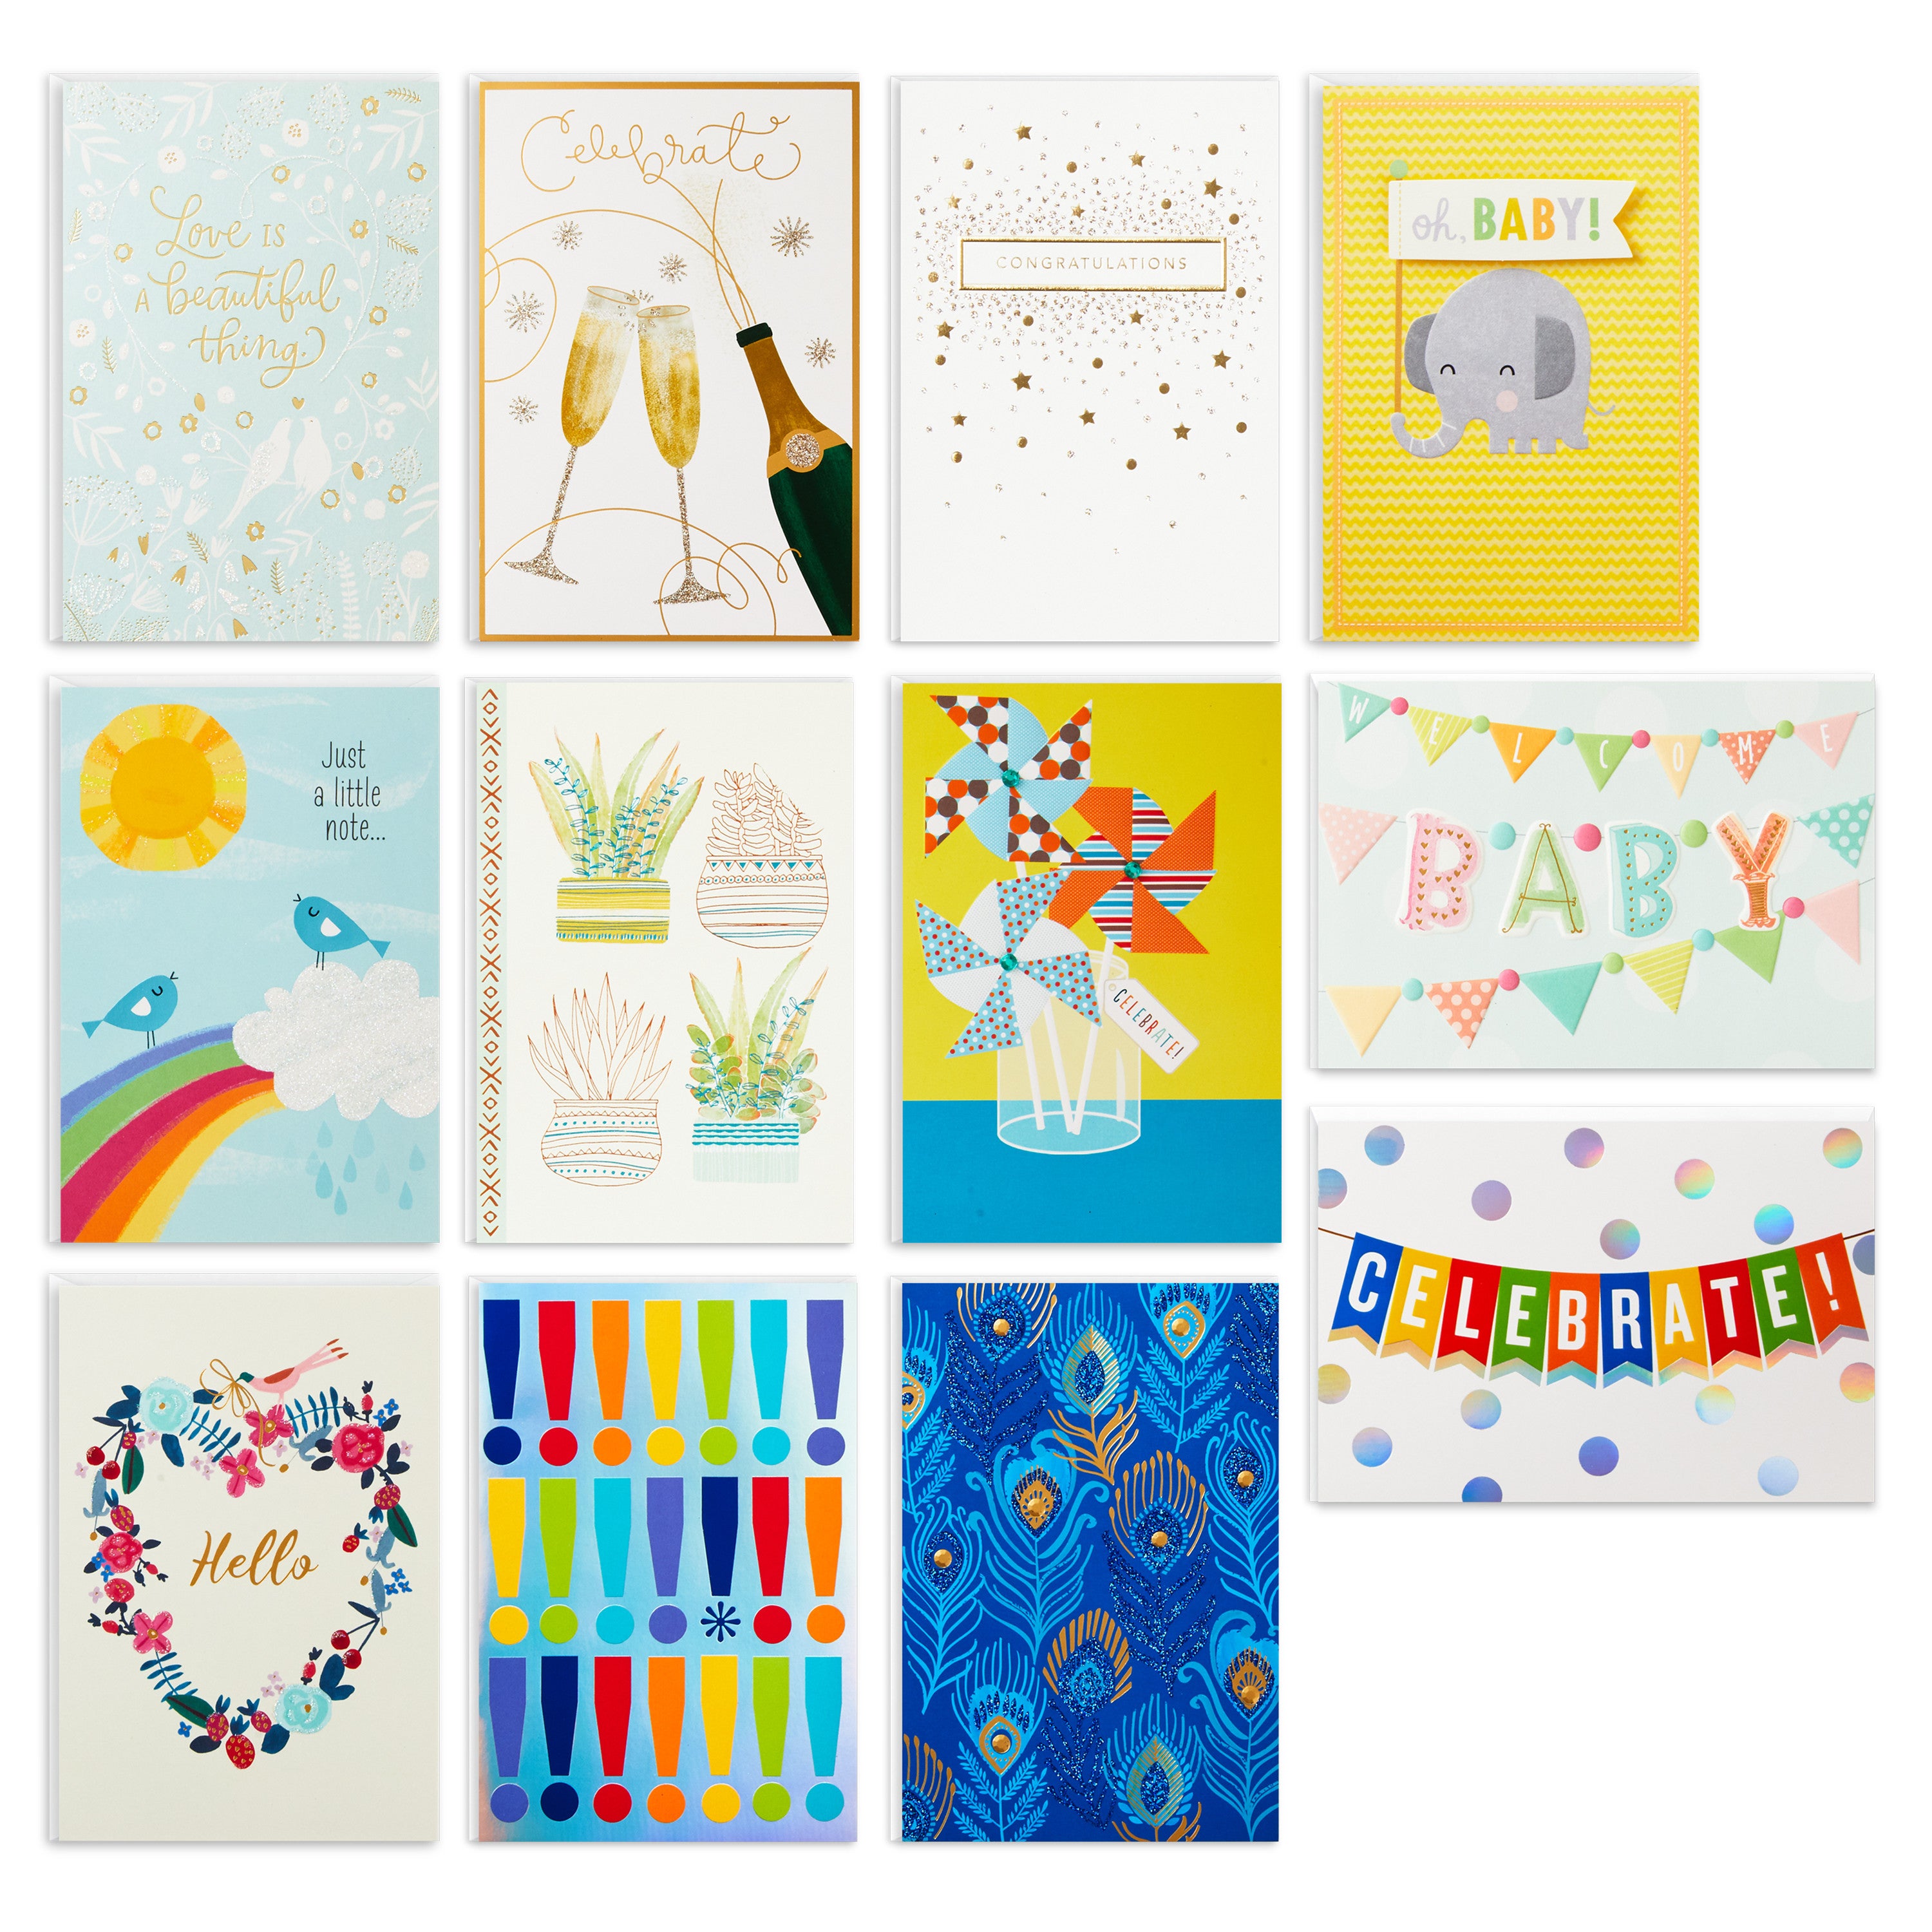 All Occasion Cards Assortment—Birthday, Congratulations, Blank Cards (12 Cards with Envelopes, Refill Pack for Card Organizer Box)